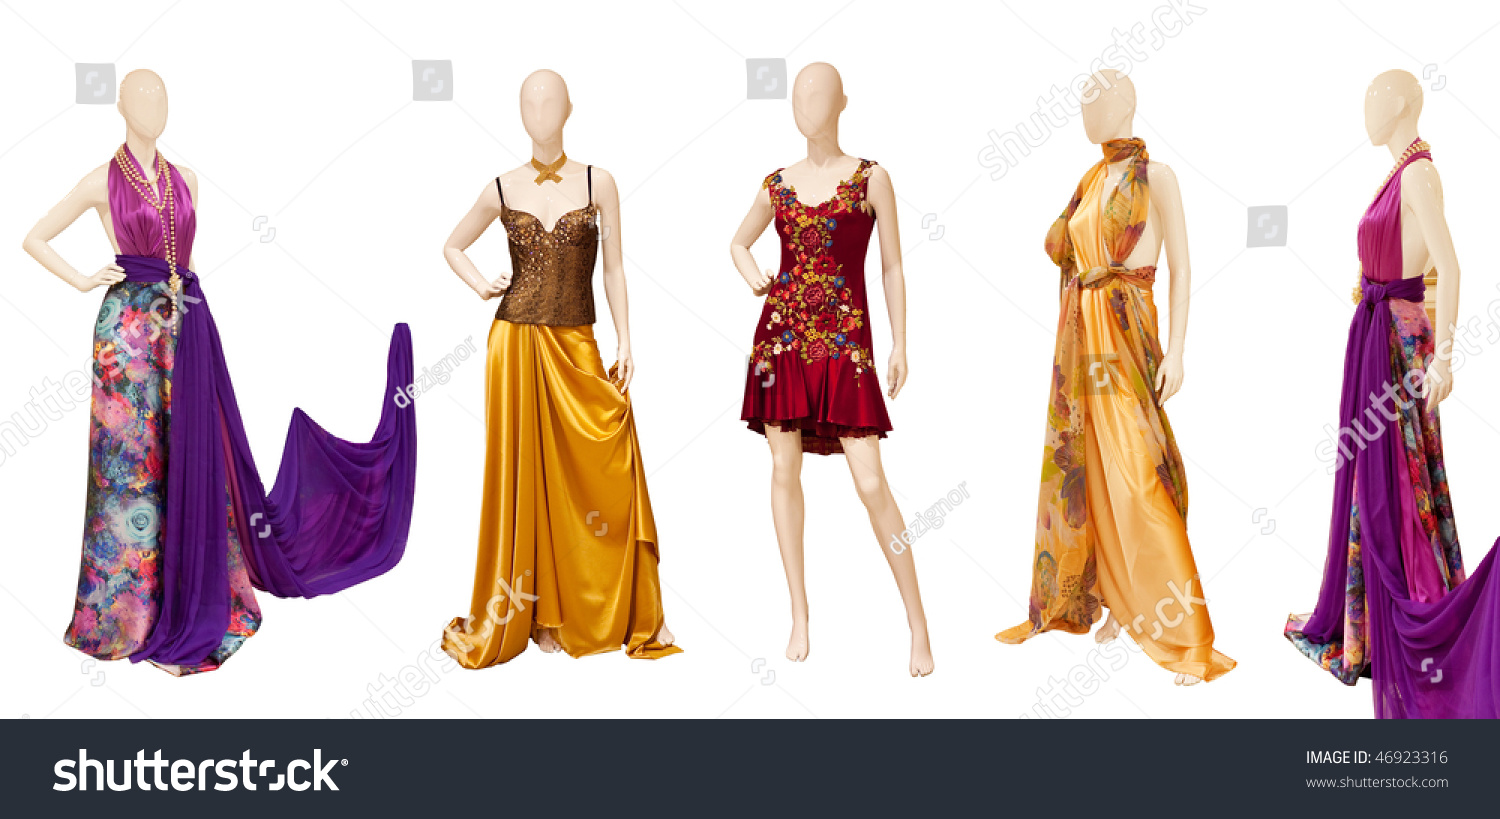 Mannequins Dressed In Various Types Of Cloth Stock Photo 46923316 ...